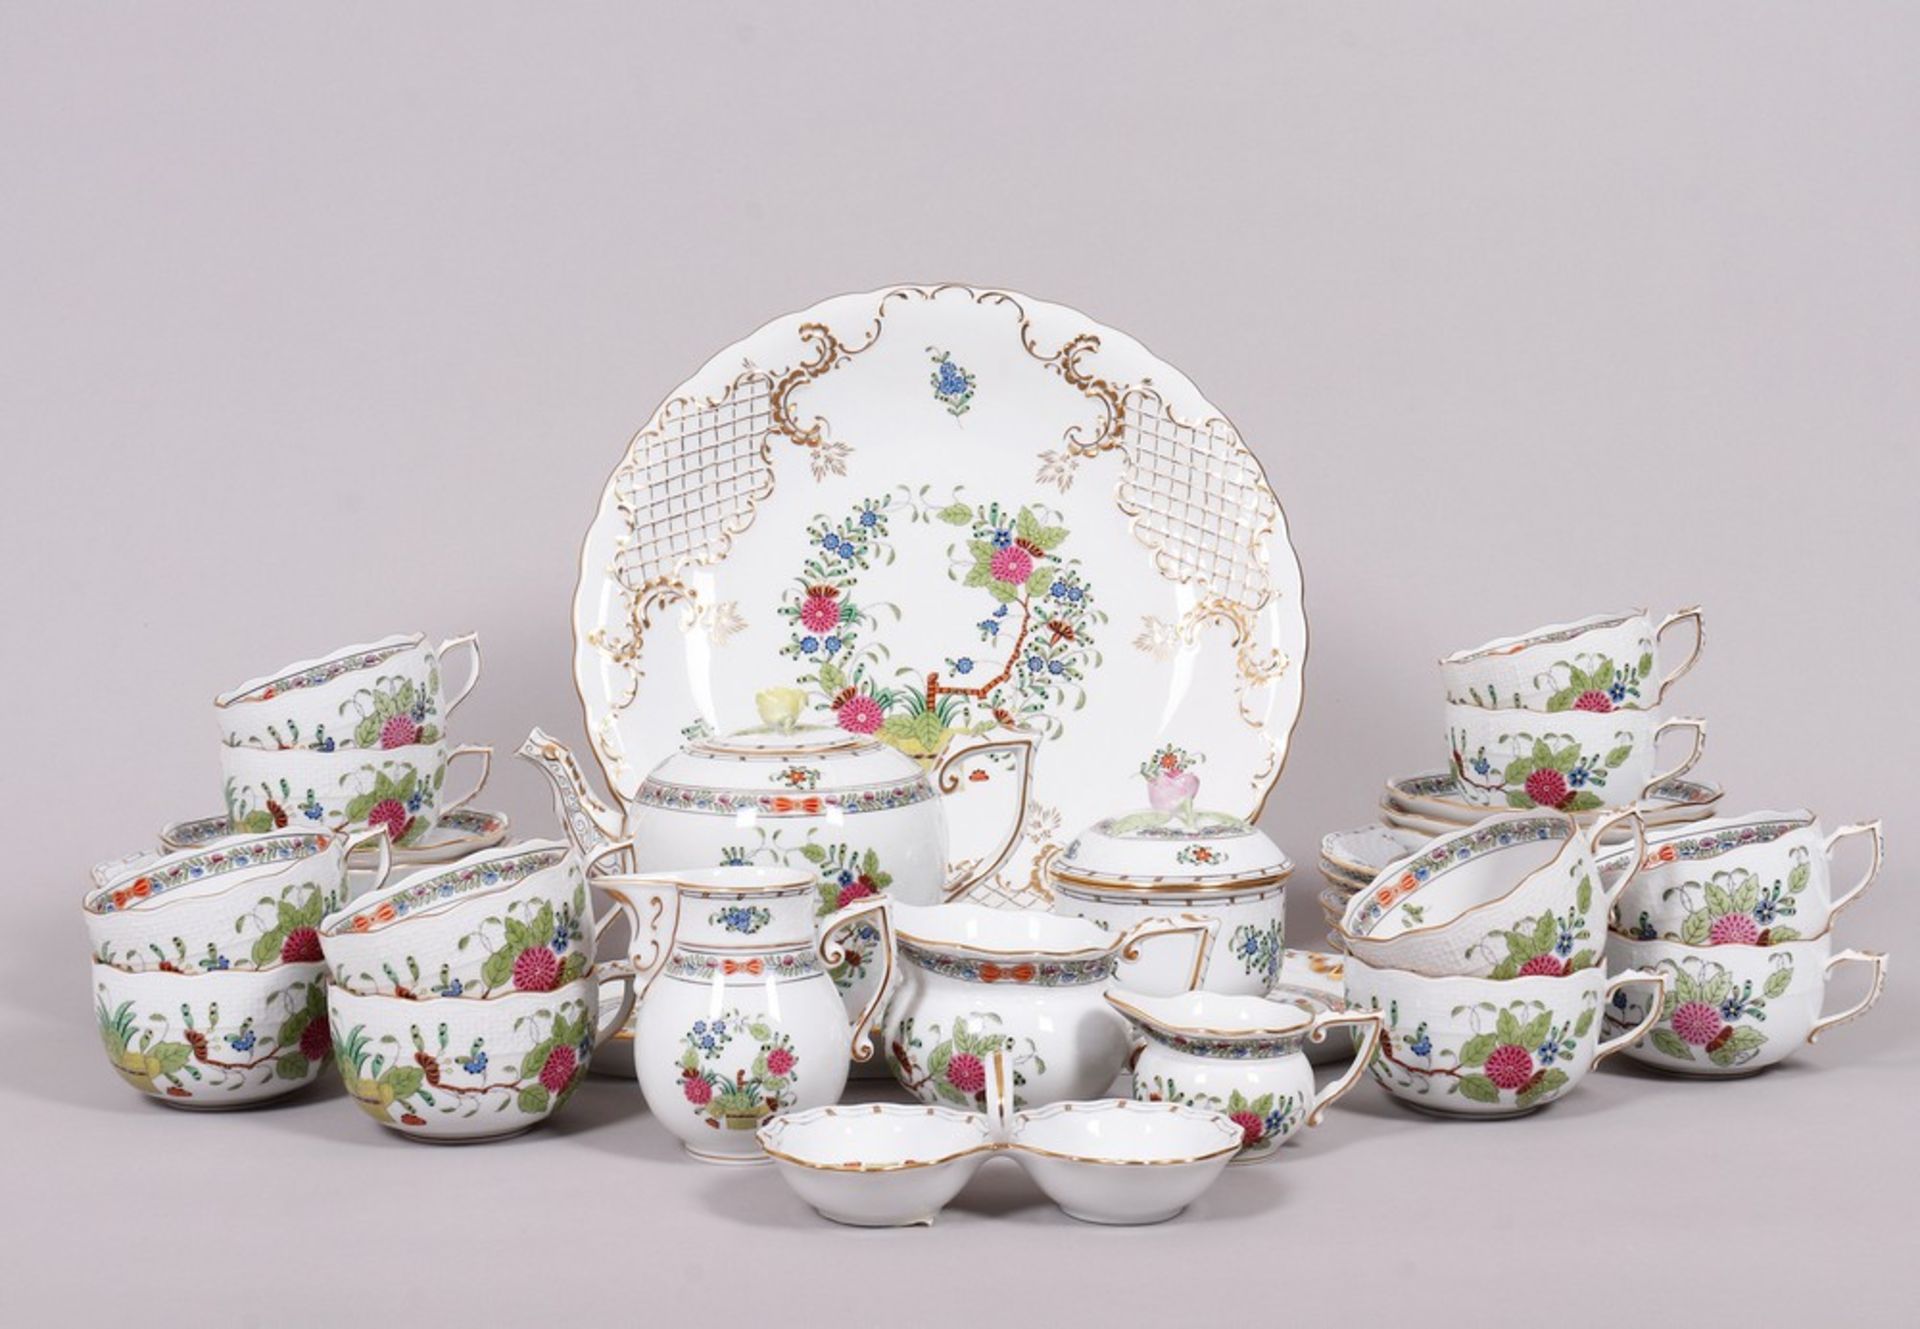 Part-Coffee/tea service, Herend, Hungary, relief form "Ozier", decor "Indischer Blumenkorb", 20th C